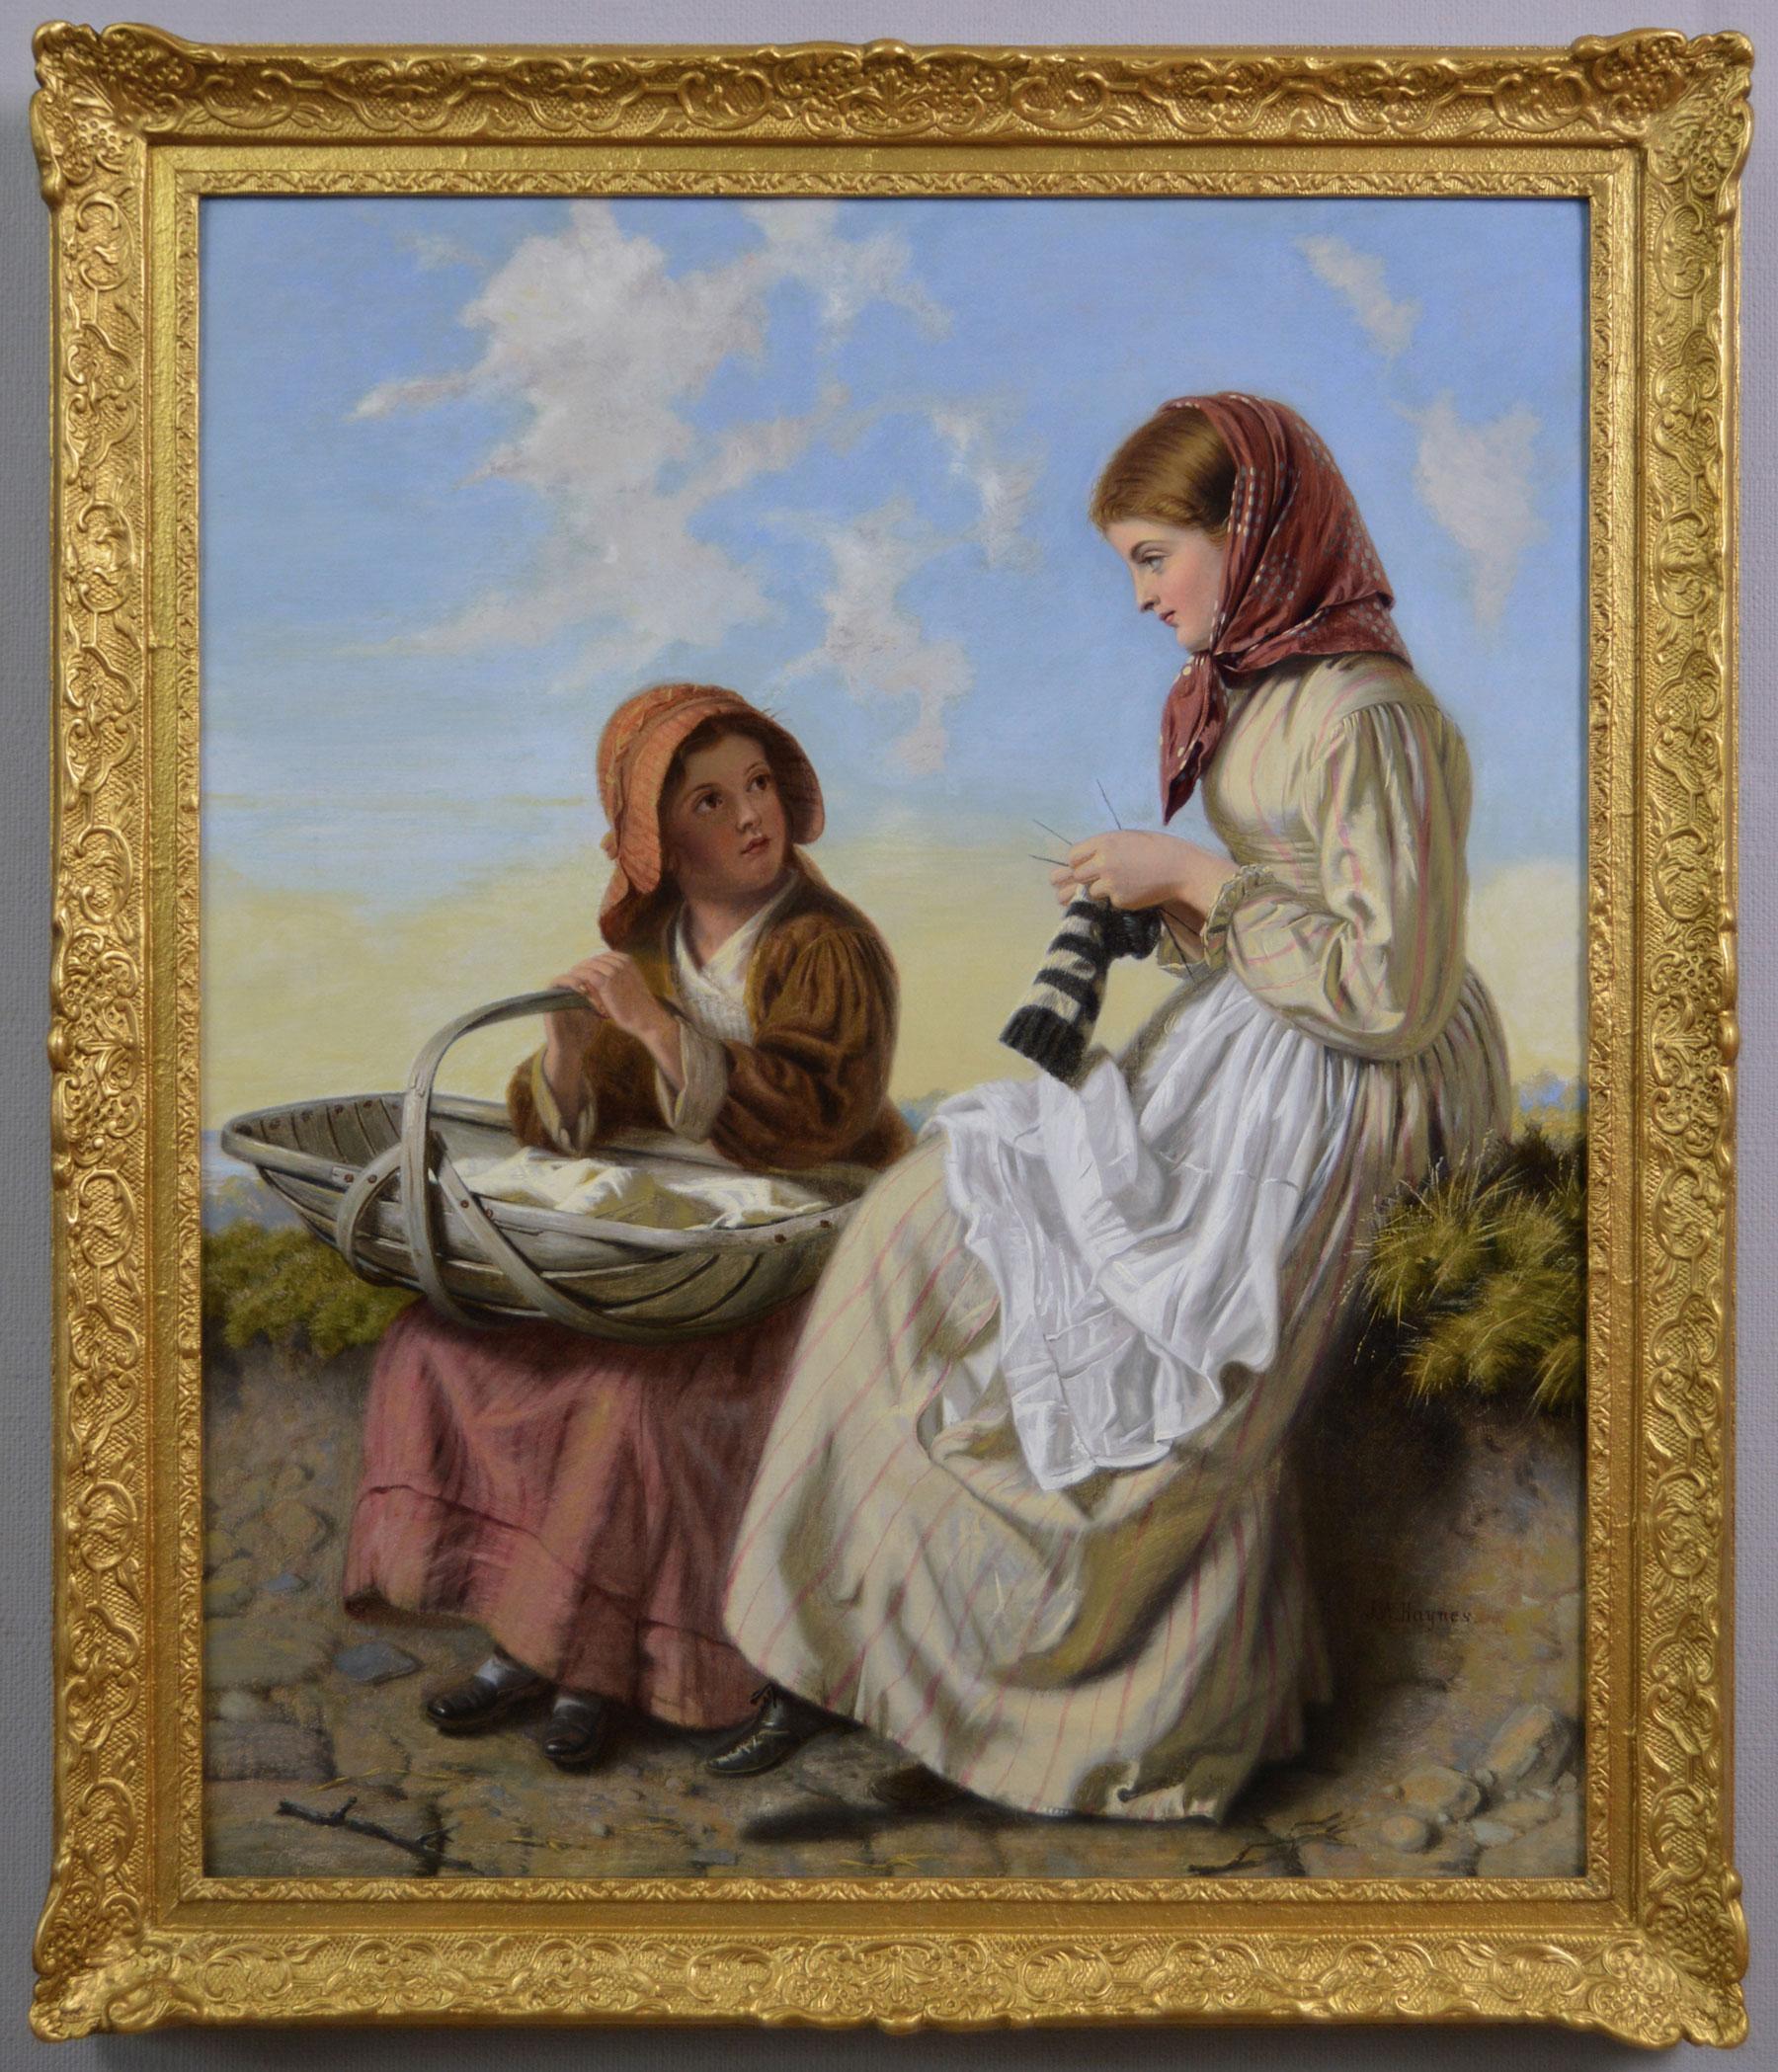 John William Haynes Figurative Painting - 19th Century genre oil painting of a young woman knitting beside a girl